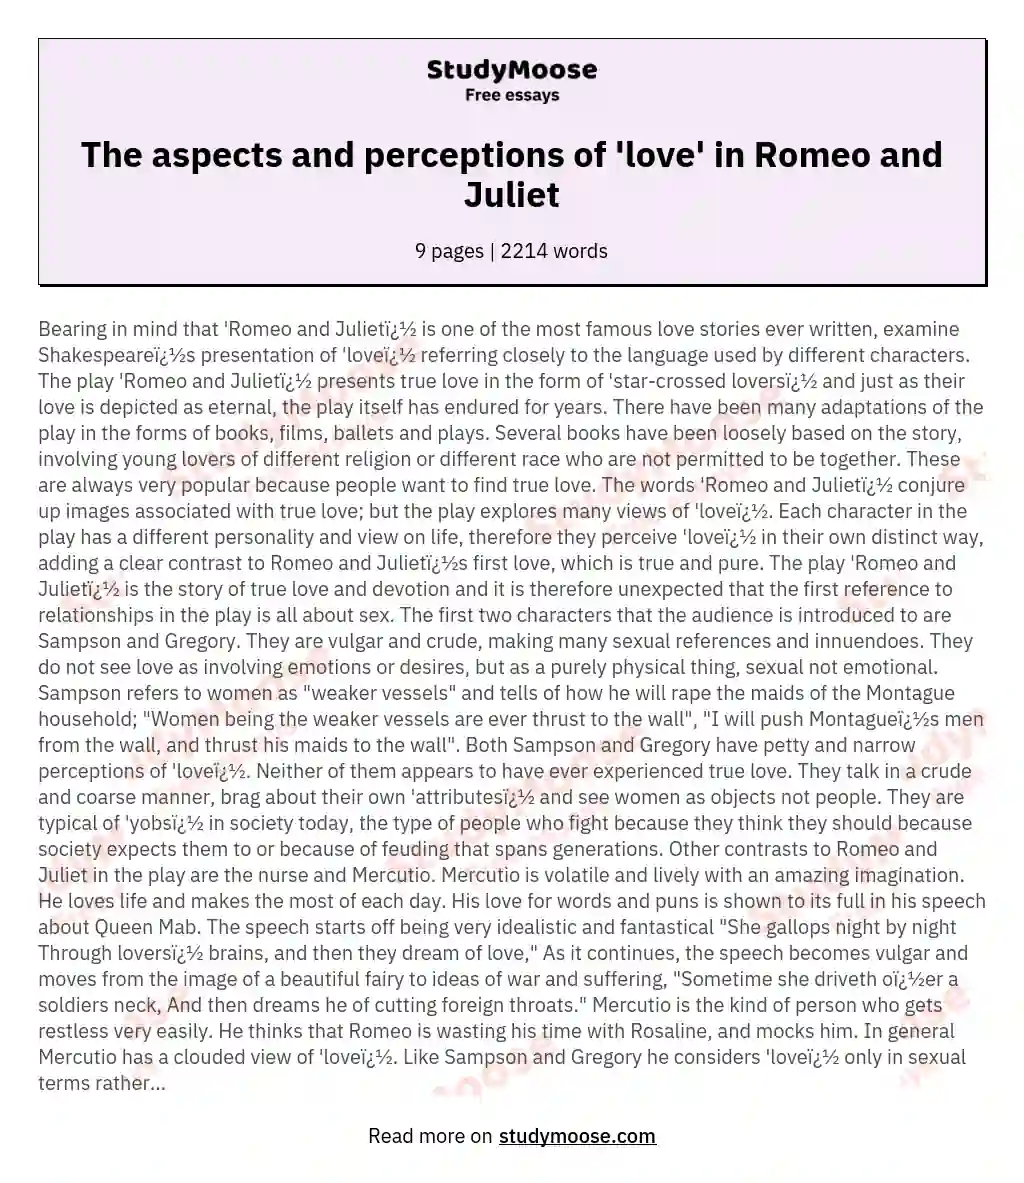 The aspects and perceptions of 'love' in Romeo and Juliet essay